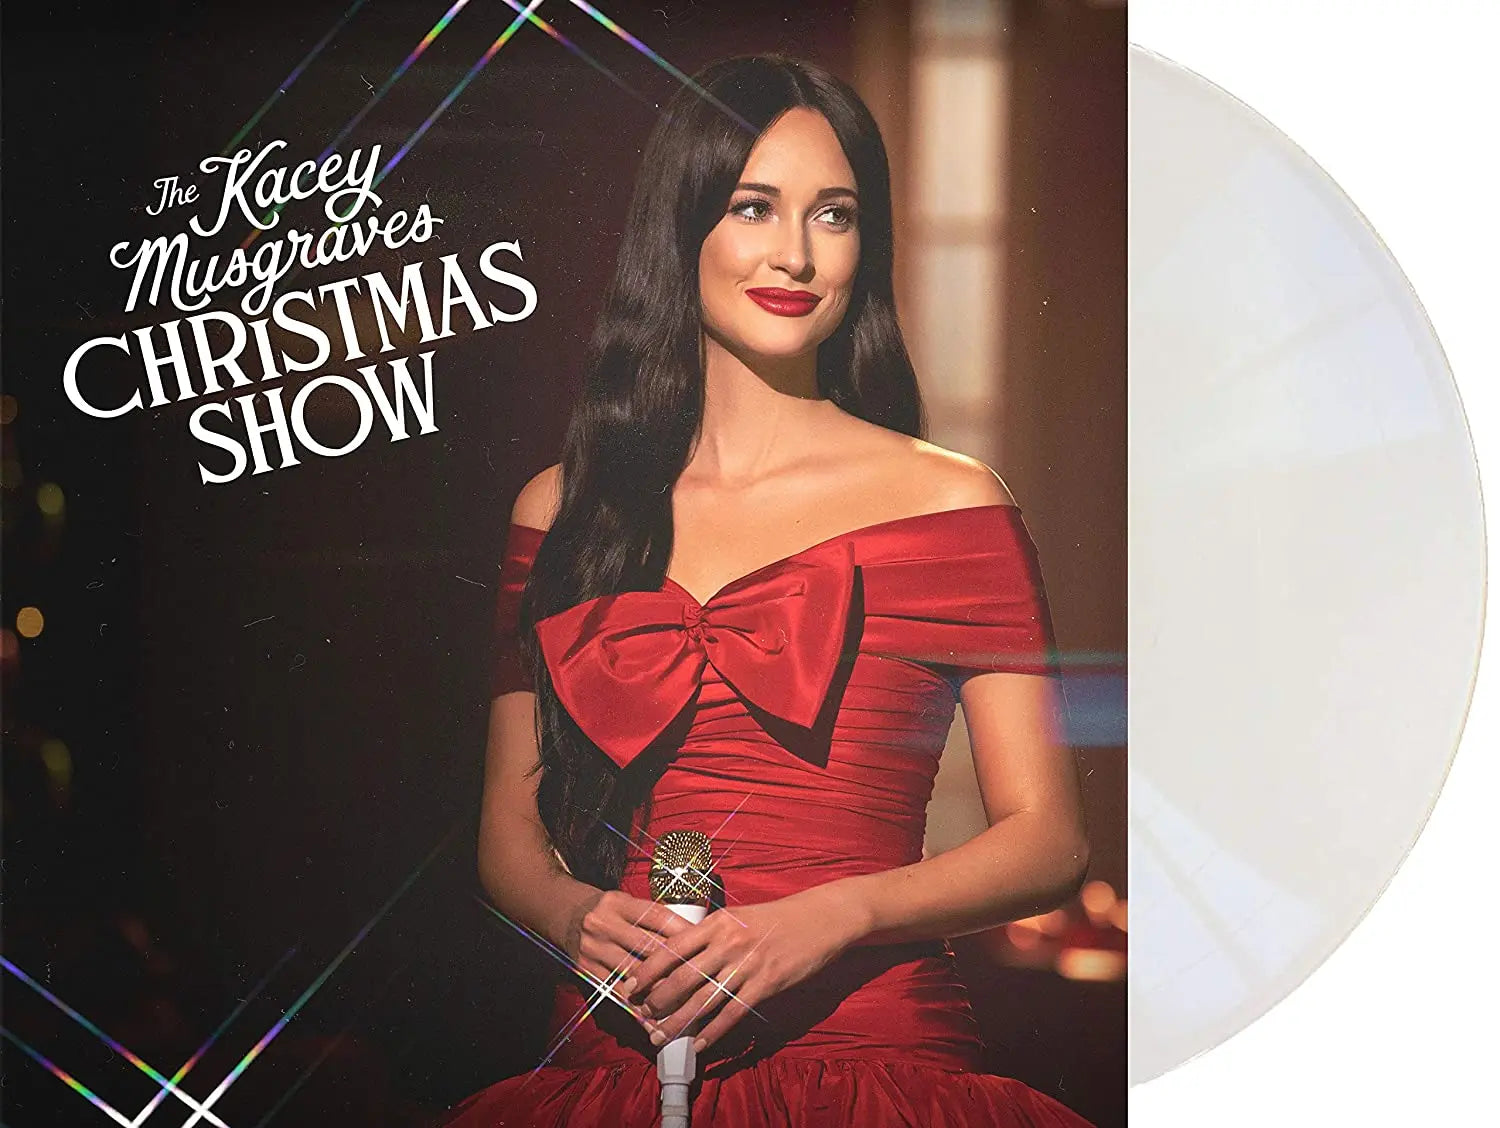 Kacey Musgraves - The Kacey Musgraves Christmas Show [LP] [White] Vinyl